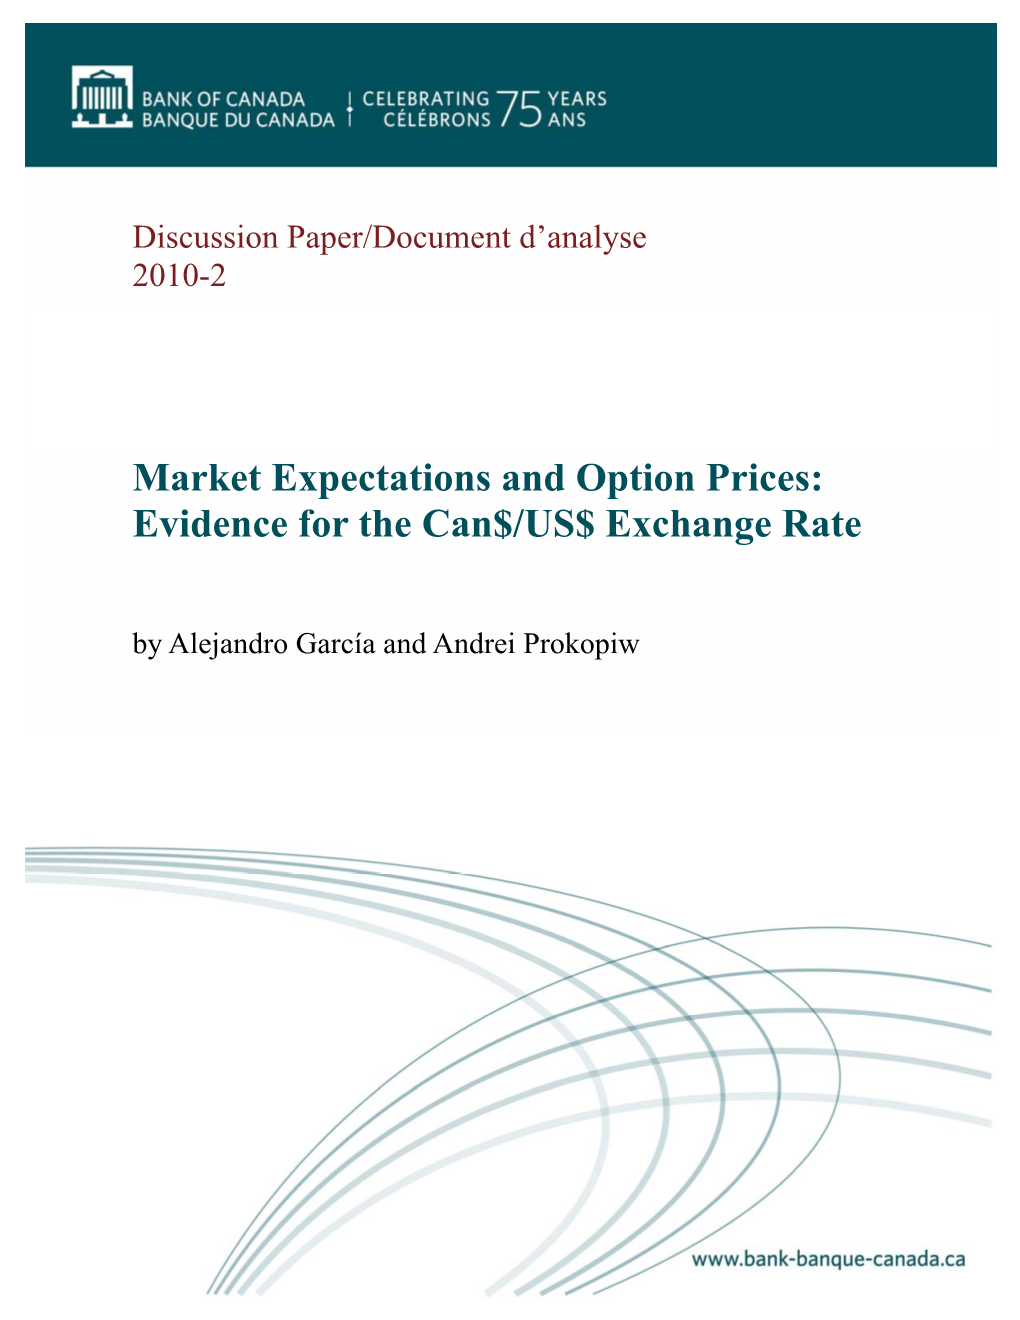 Market Expectations and Option Prices: Evidence for the Can$/US$ Exchange Rate by Alejandro García and Andrei Prokopiw